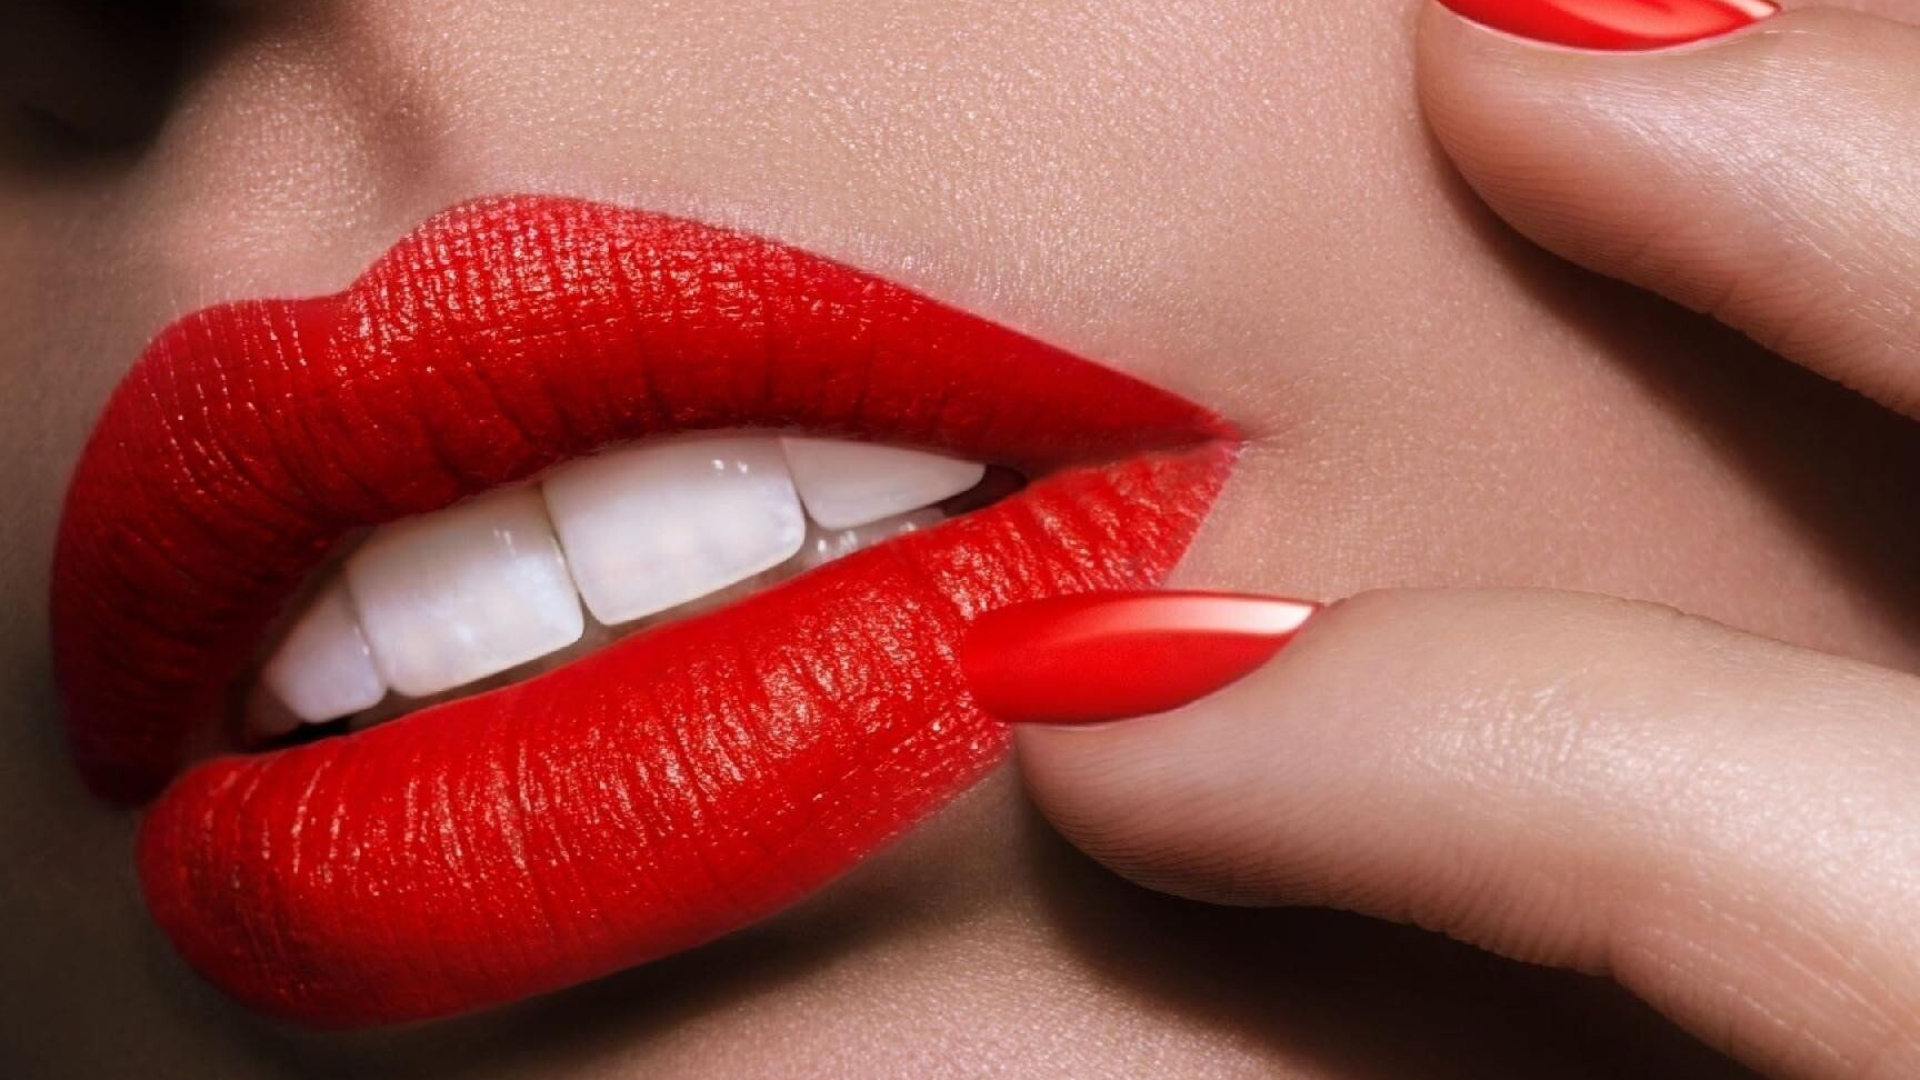 Lipstick: Matching nails and lips, Coordinating lip and nail color sets, A double dose of glam. 1920x1080 Full HD Wallpaper.